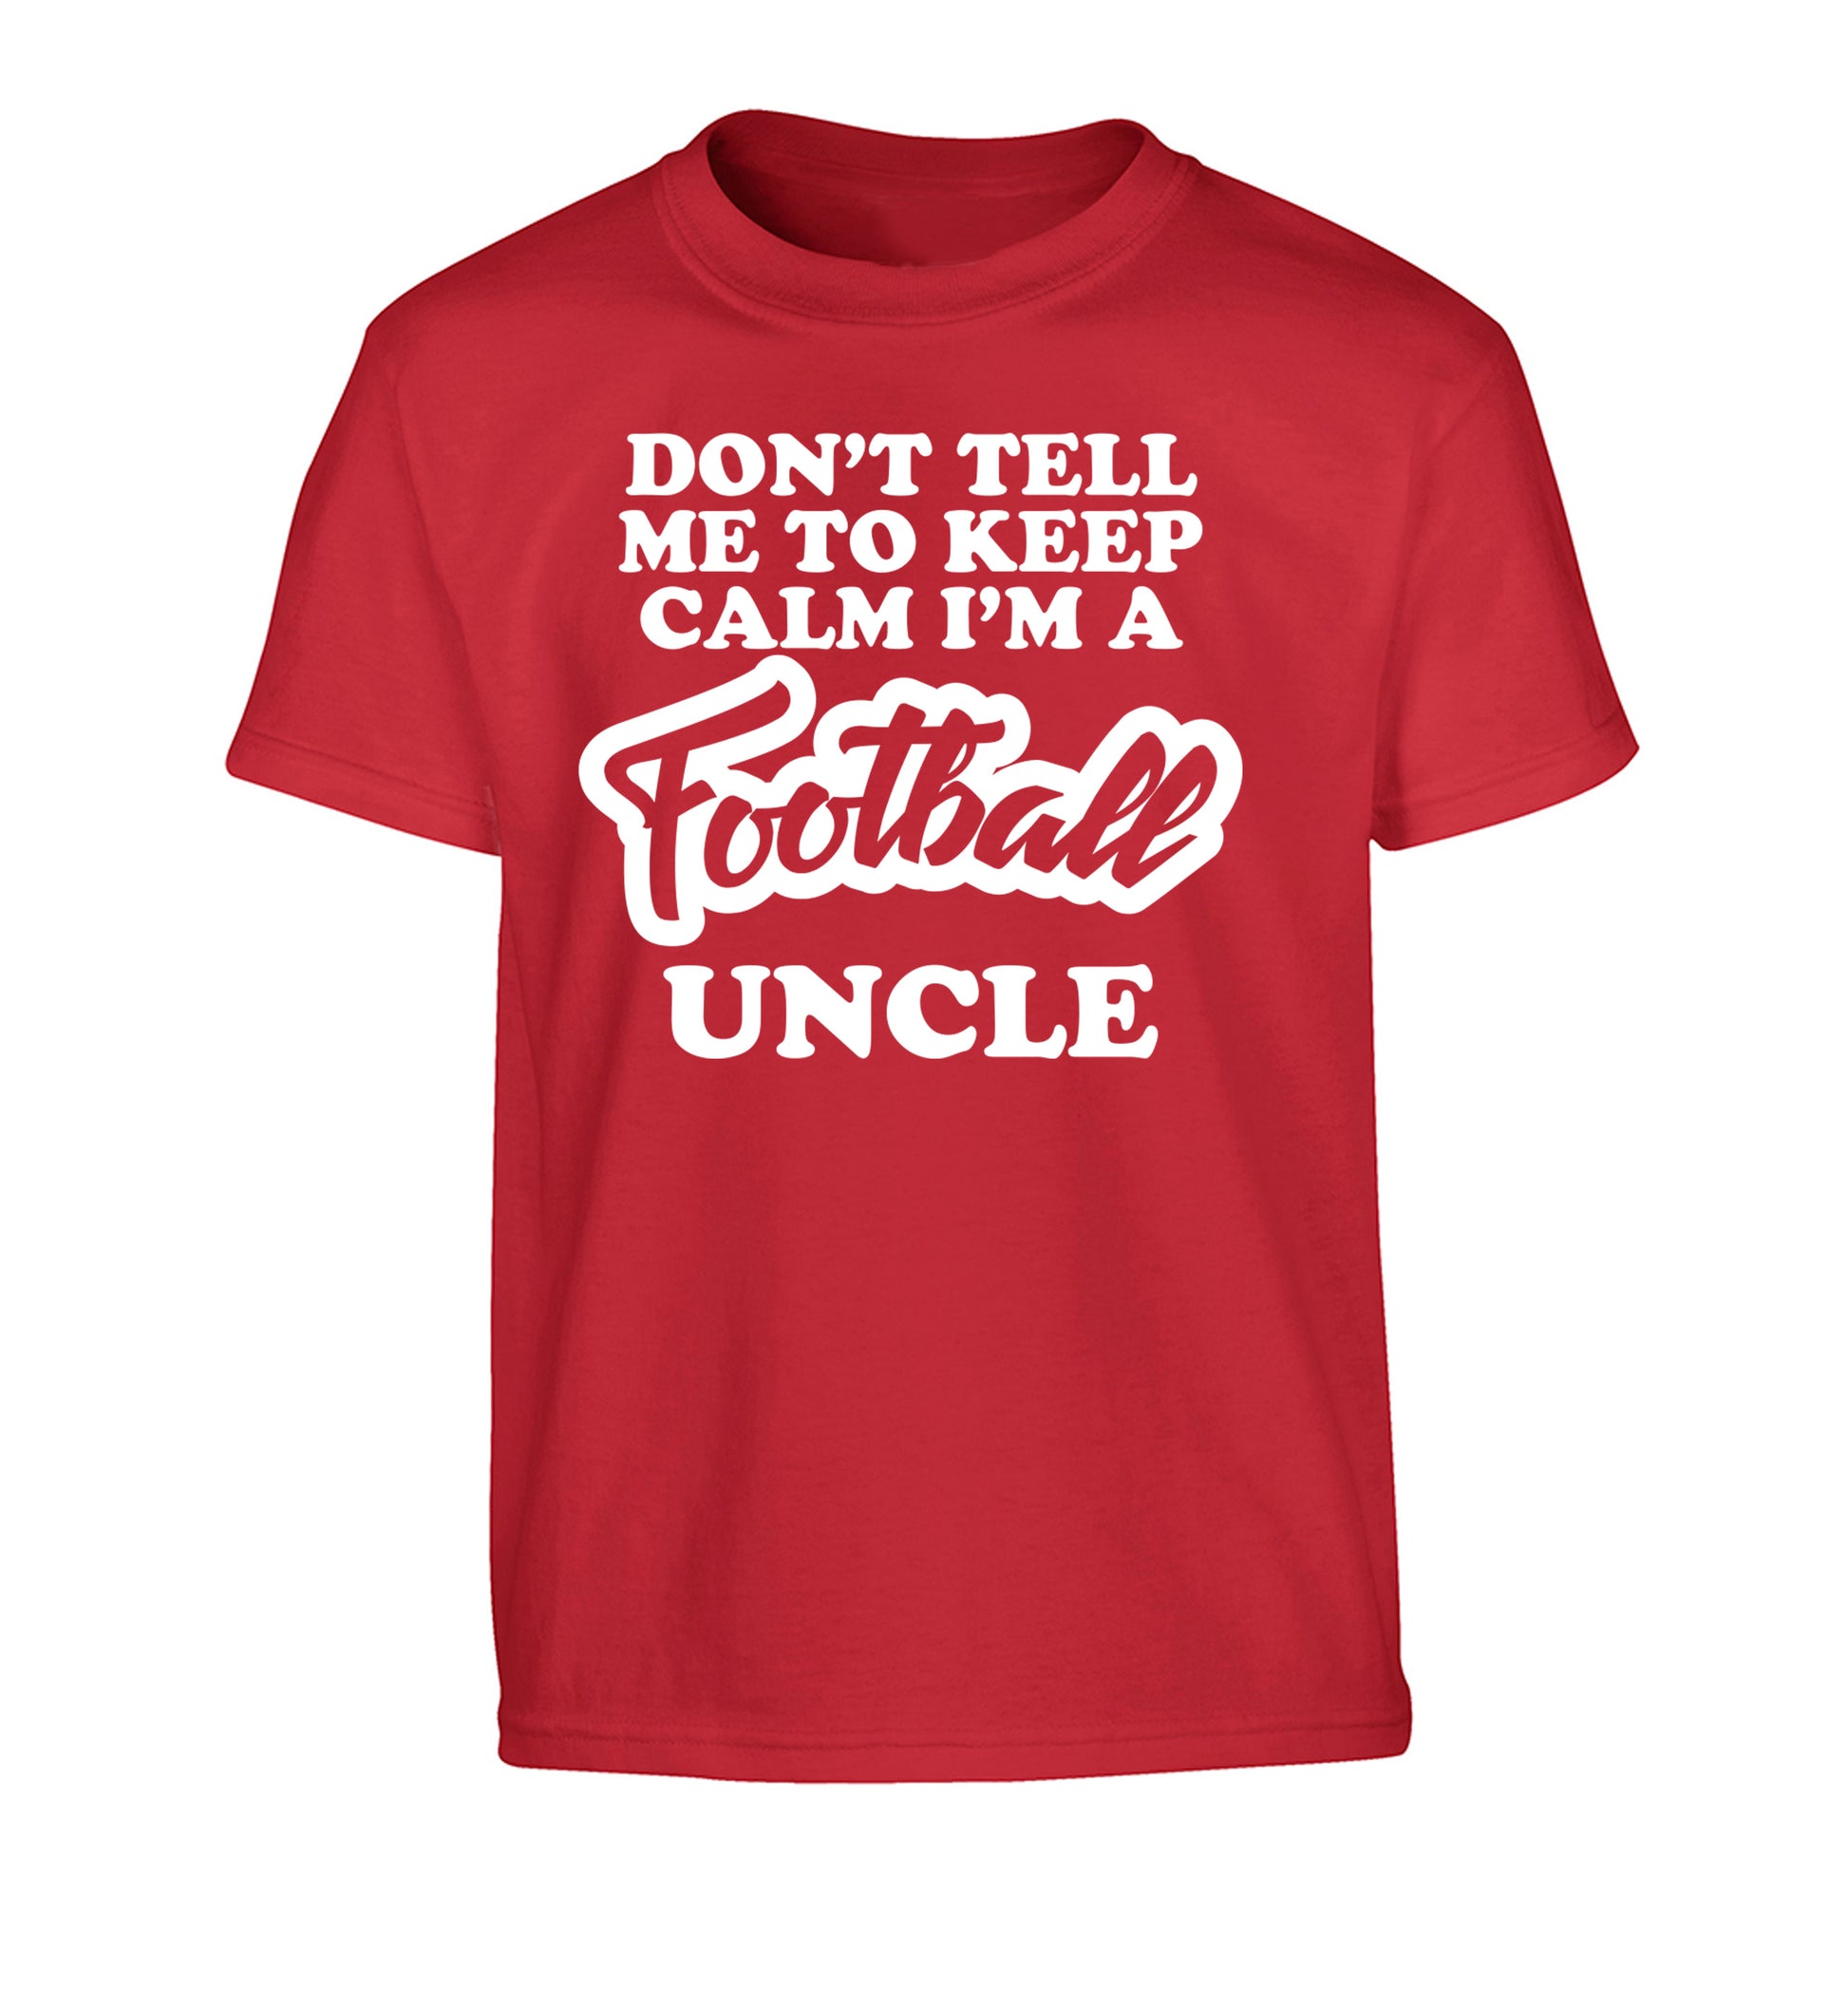 Worlds most amazing football uncle Children's red Tshirt 12-14 Years